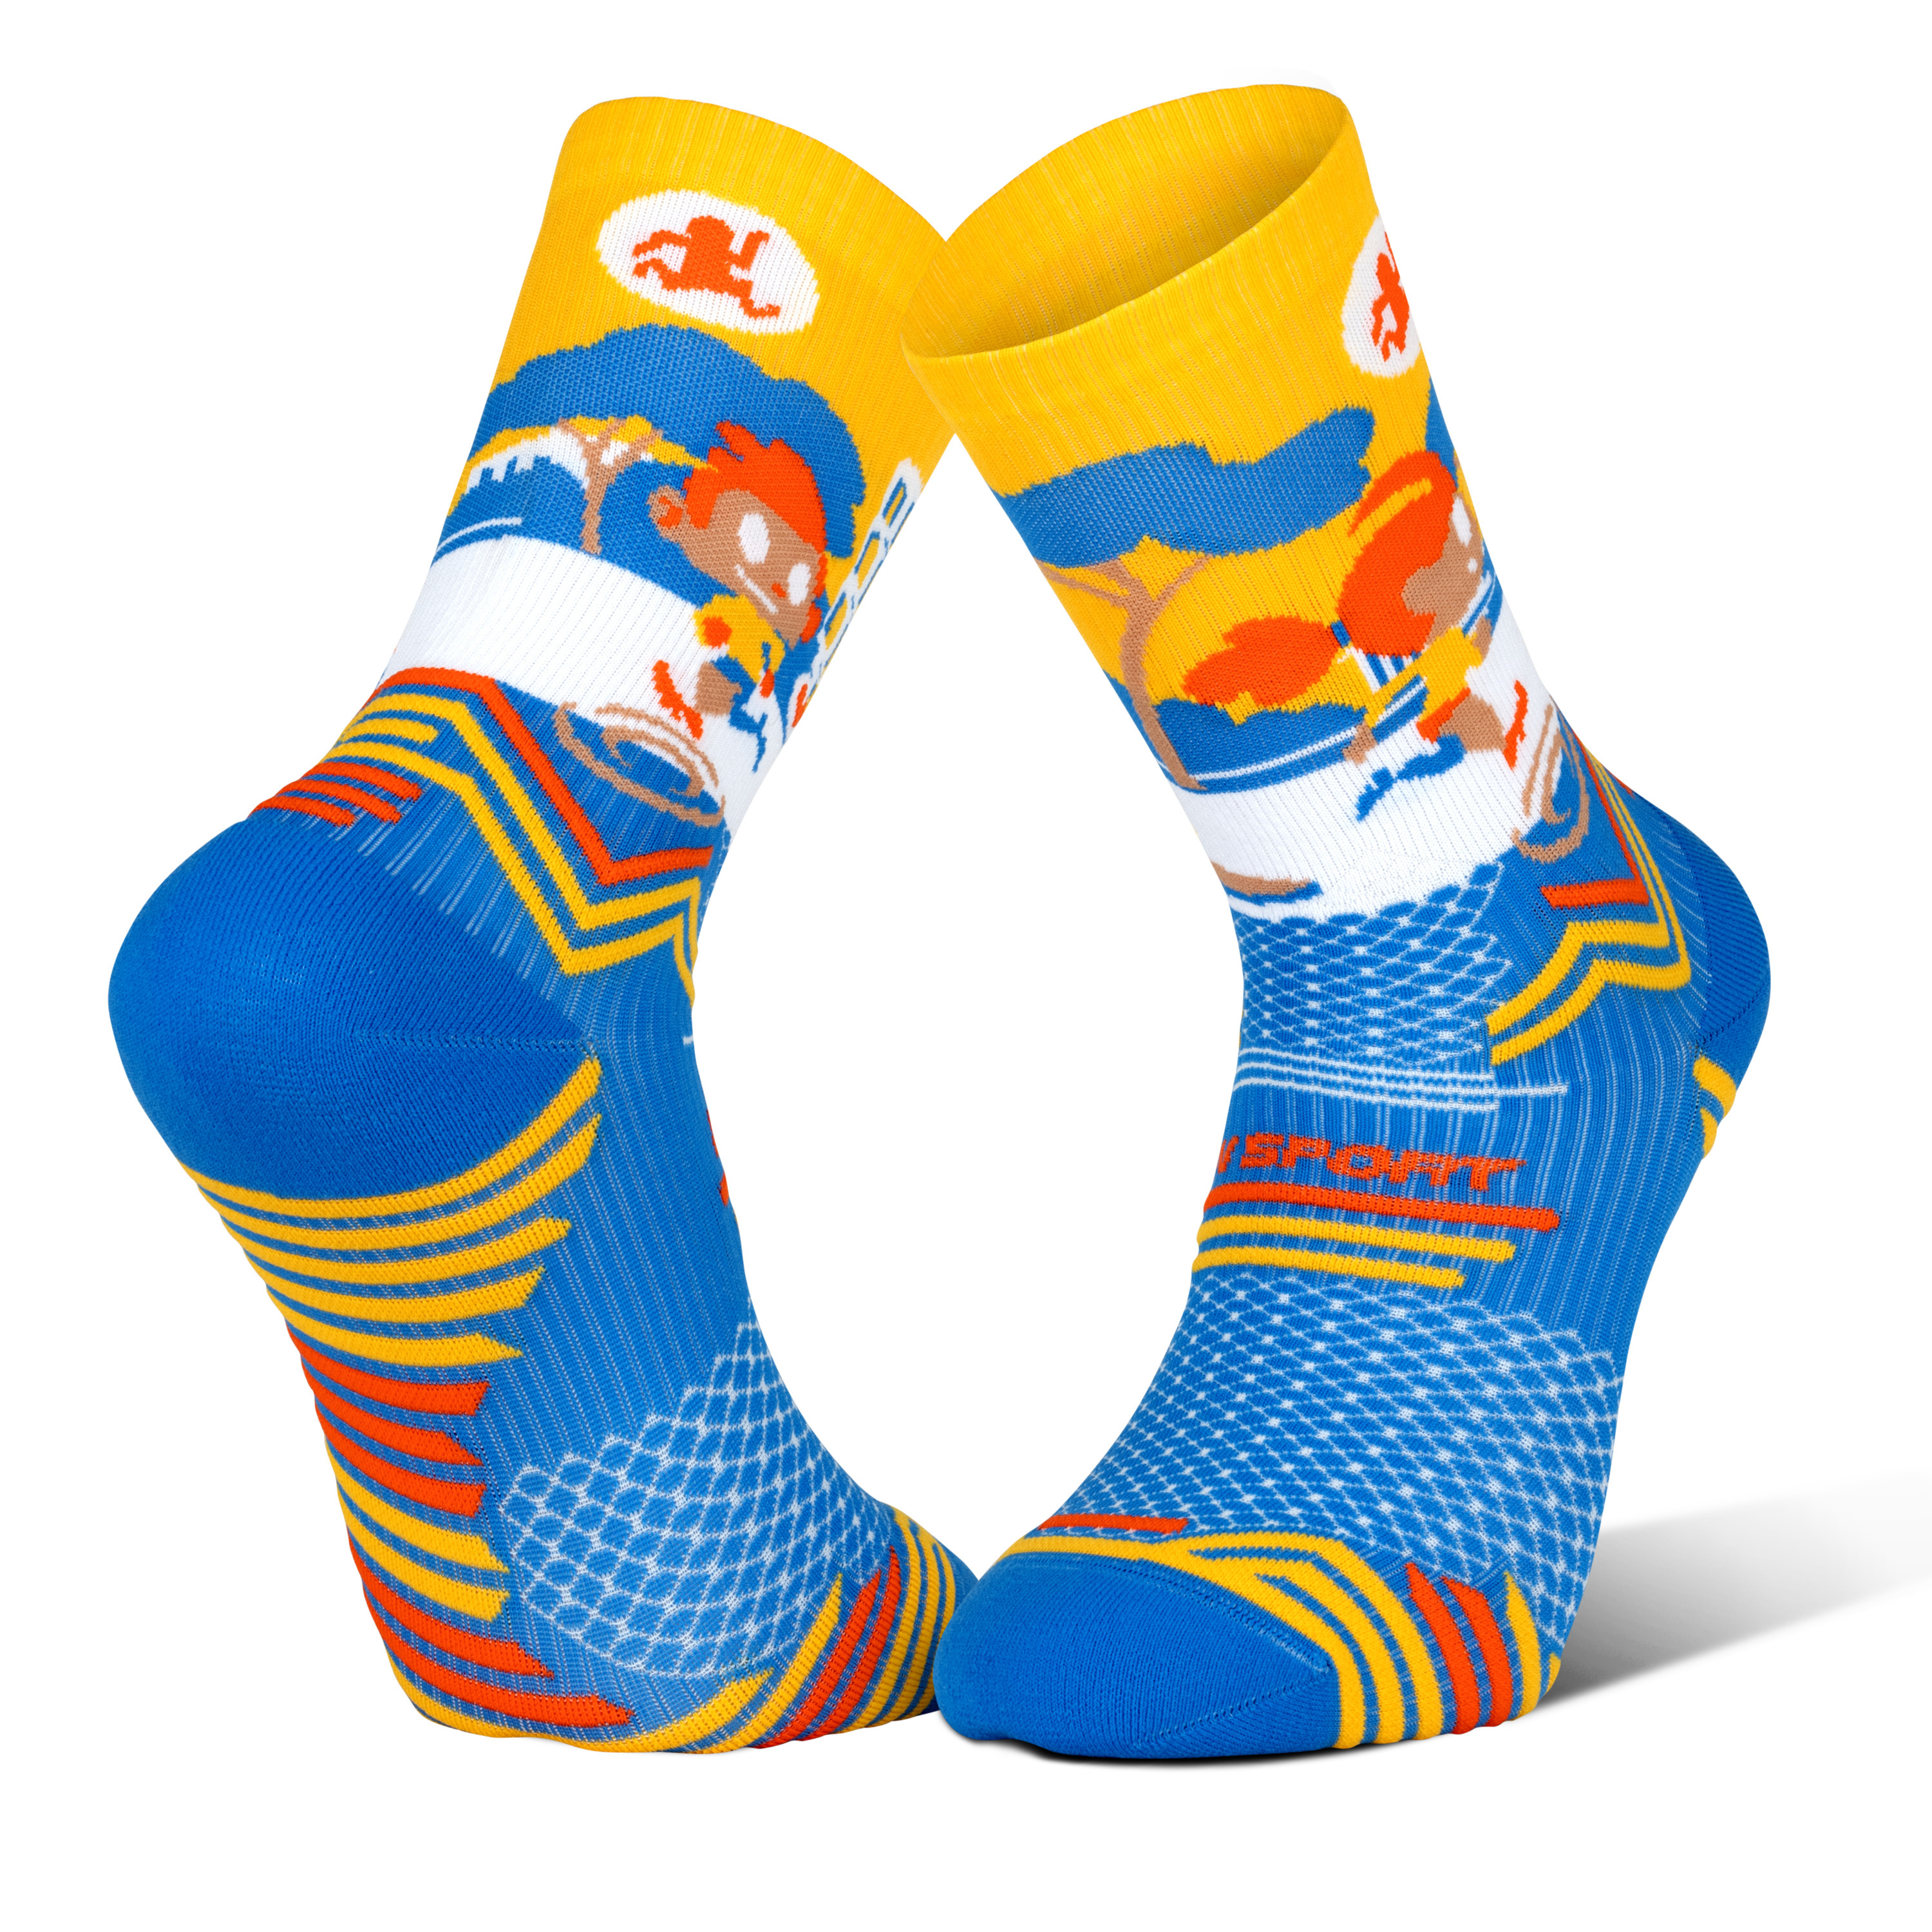 Chaussettes BV Sport Trail Ultra Collector DBDB